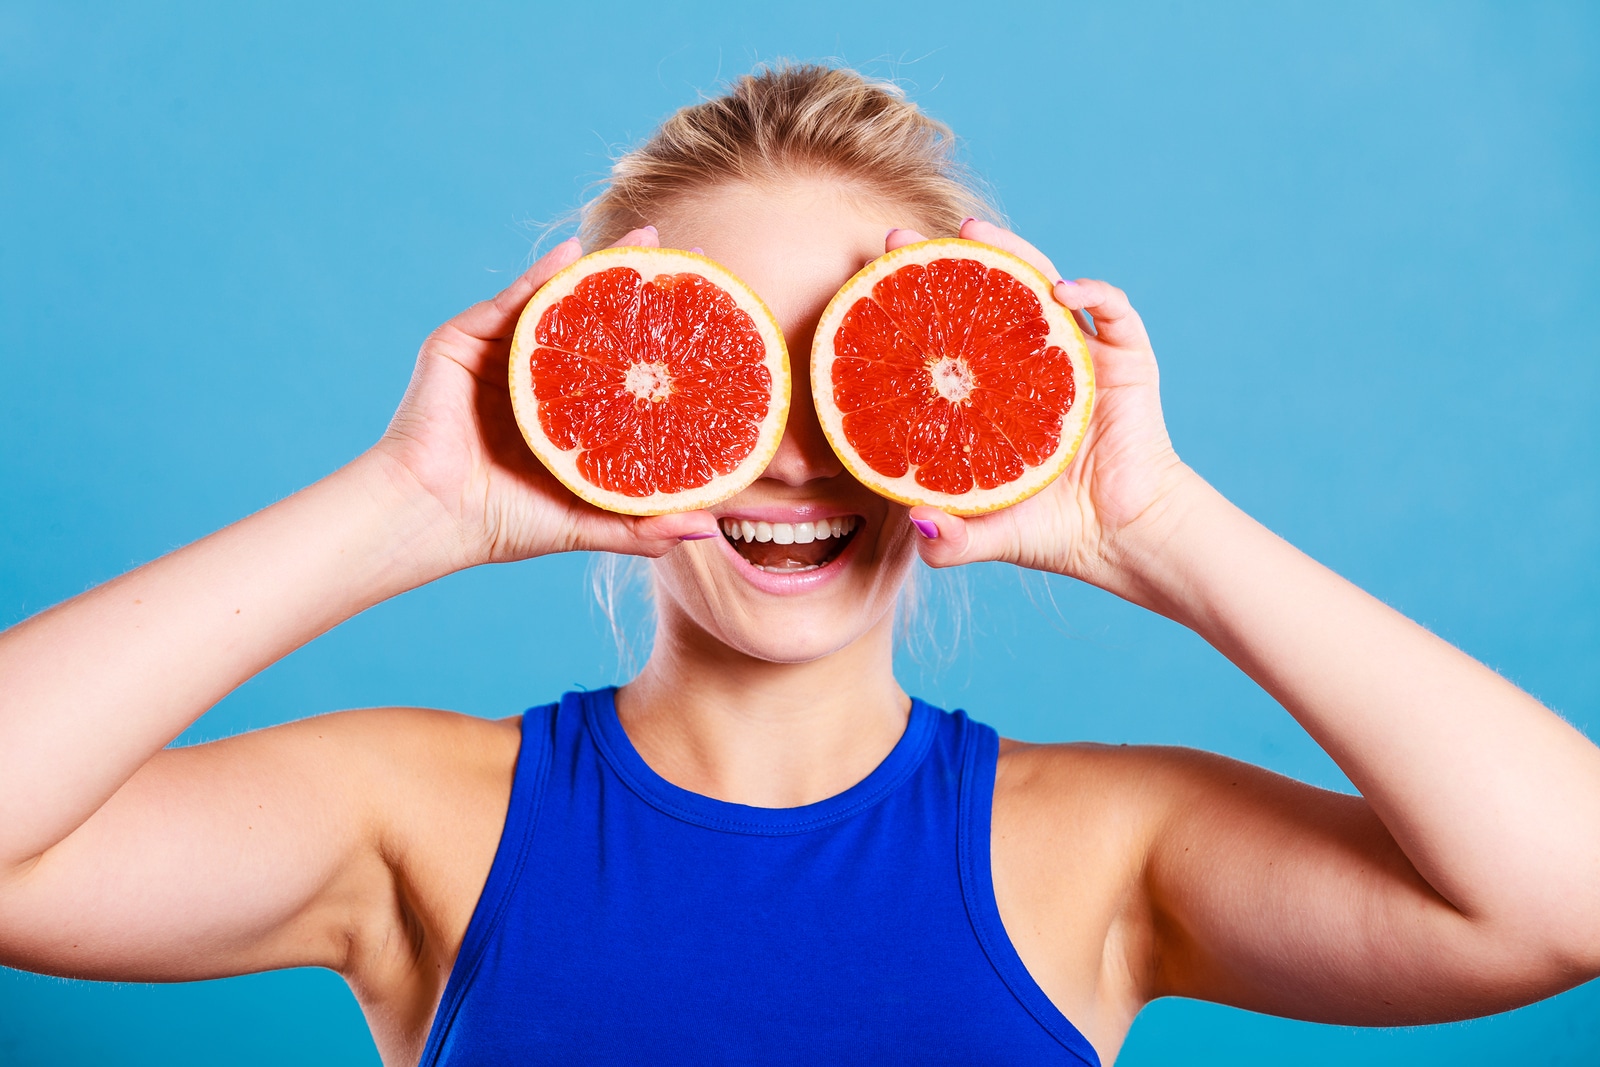 Woman fit girl holding two halfs of grapefruit citrus fruit in hands covering her eyes. Healthy diet food. Happiness holidays fun concept.